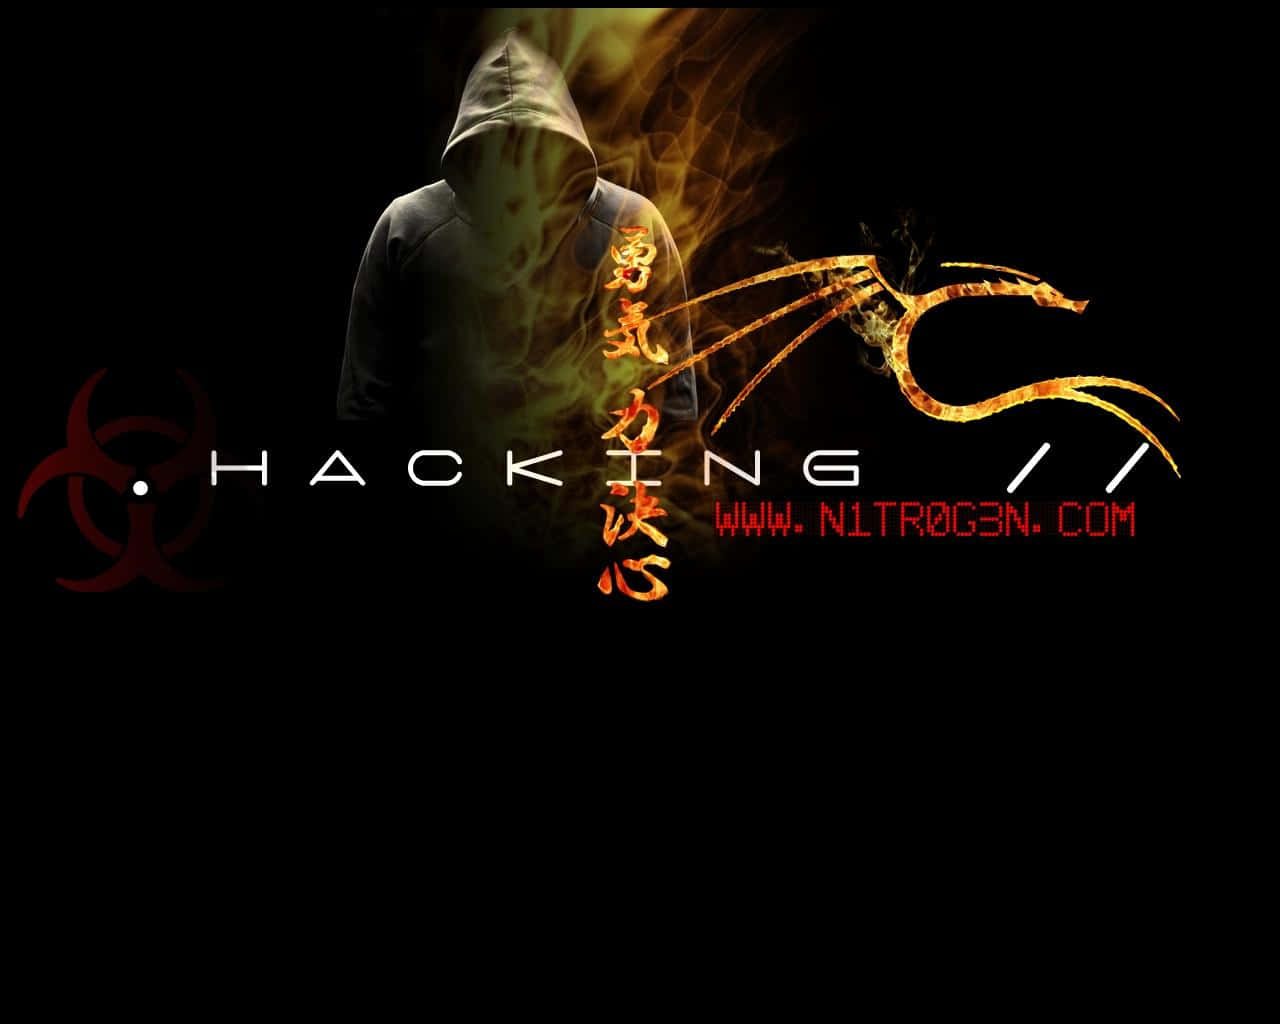 ethical hacking wallpaper